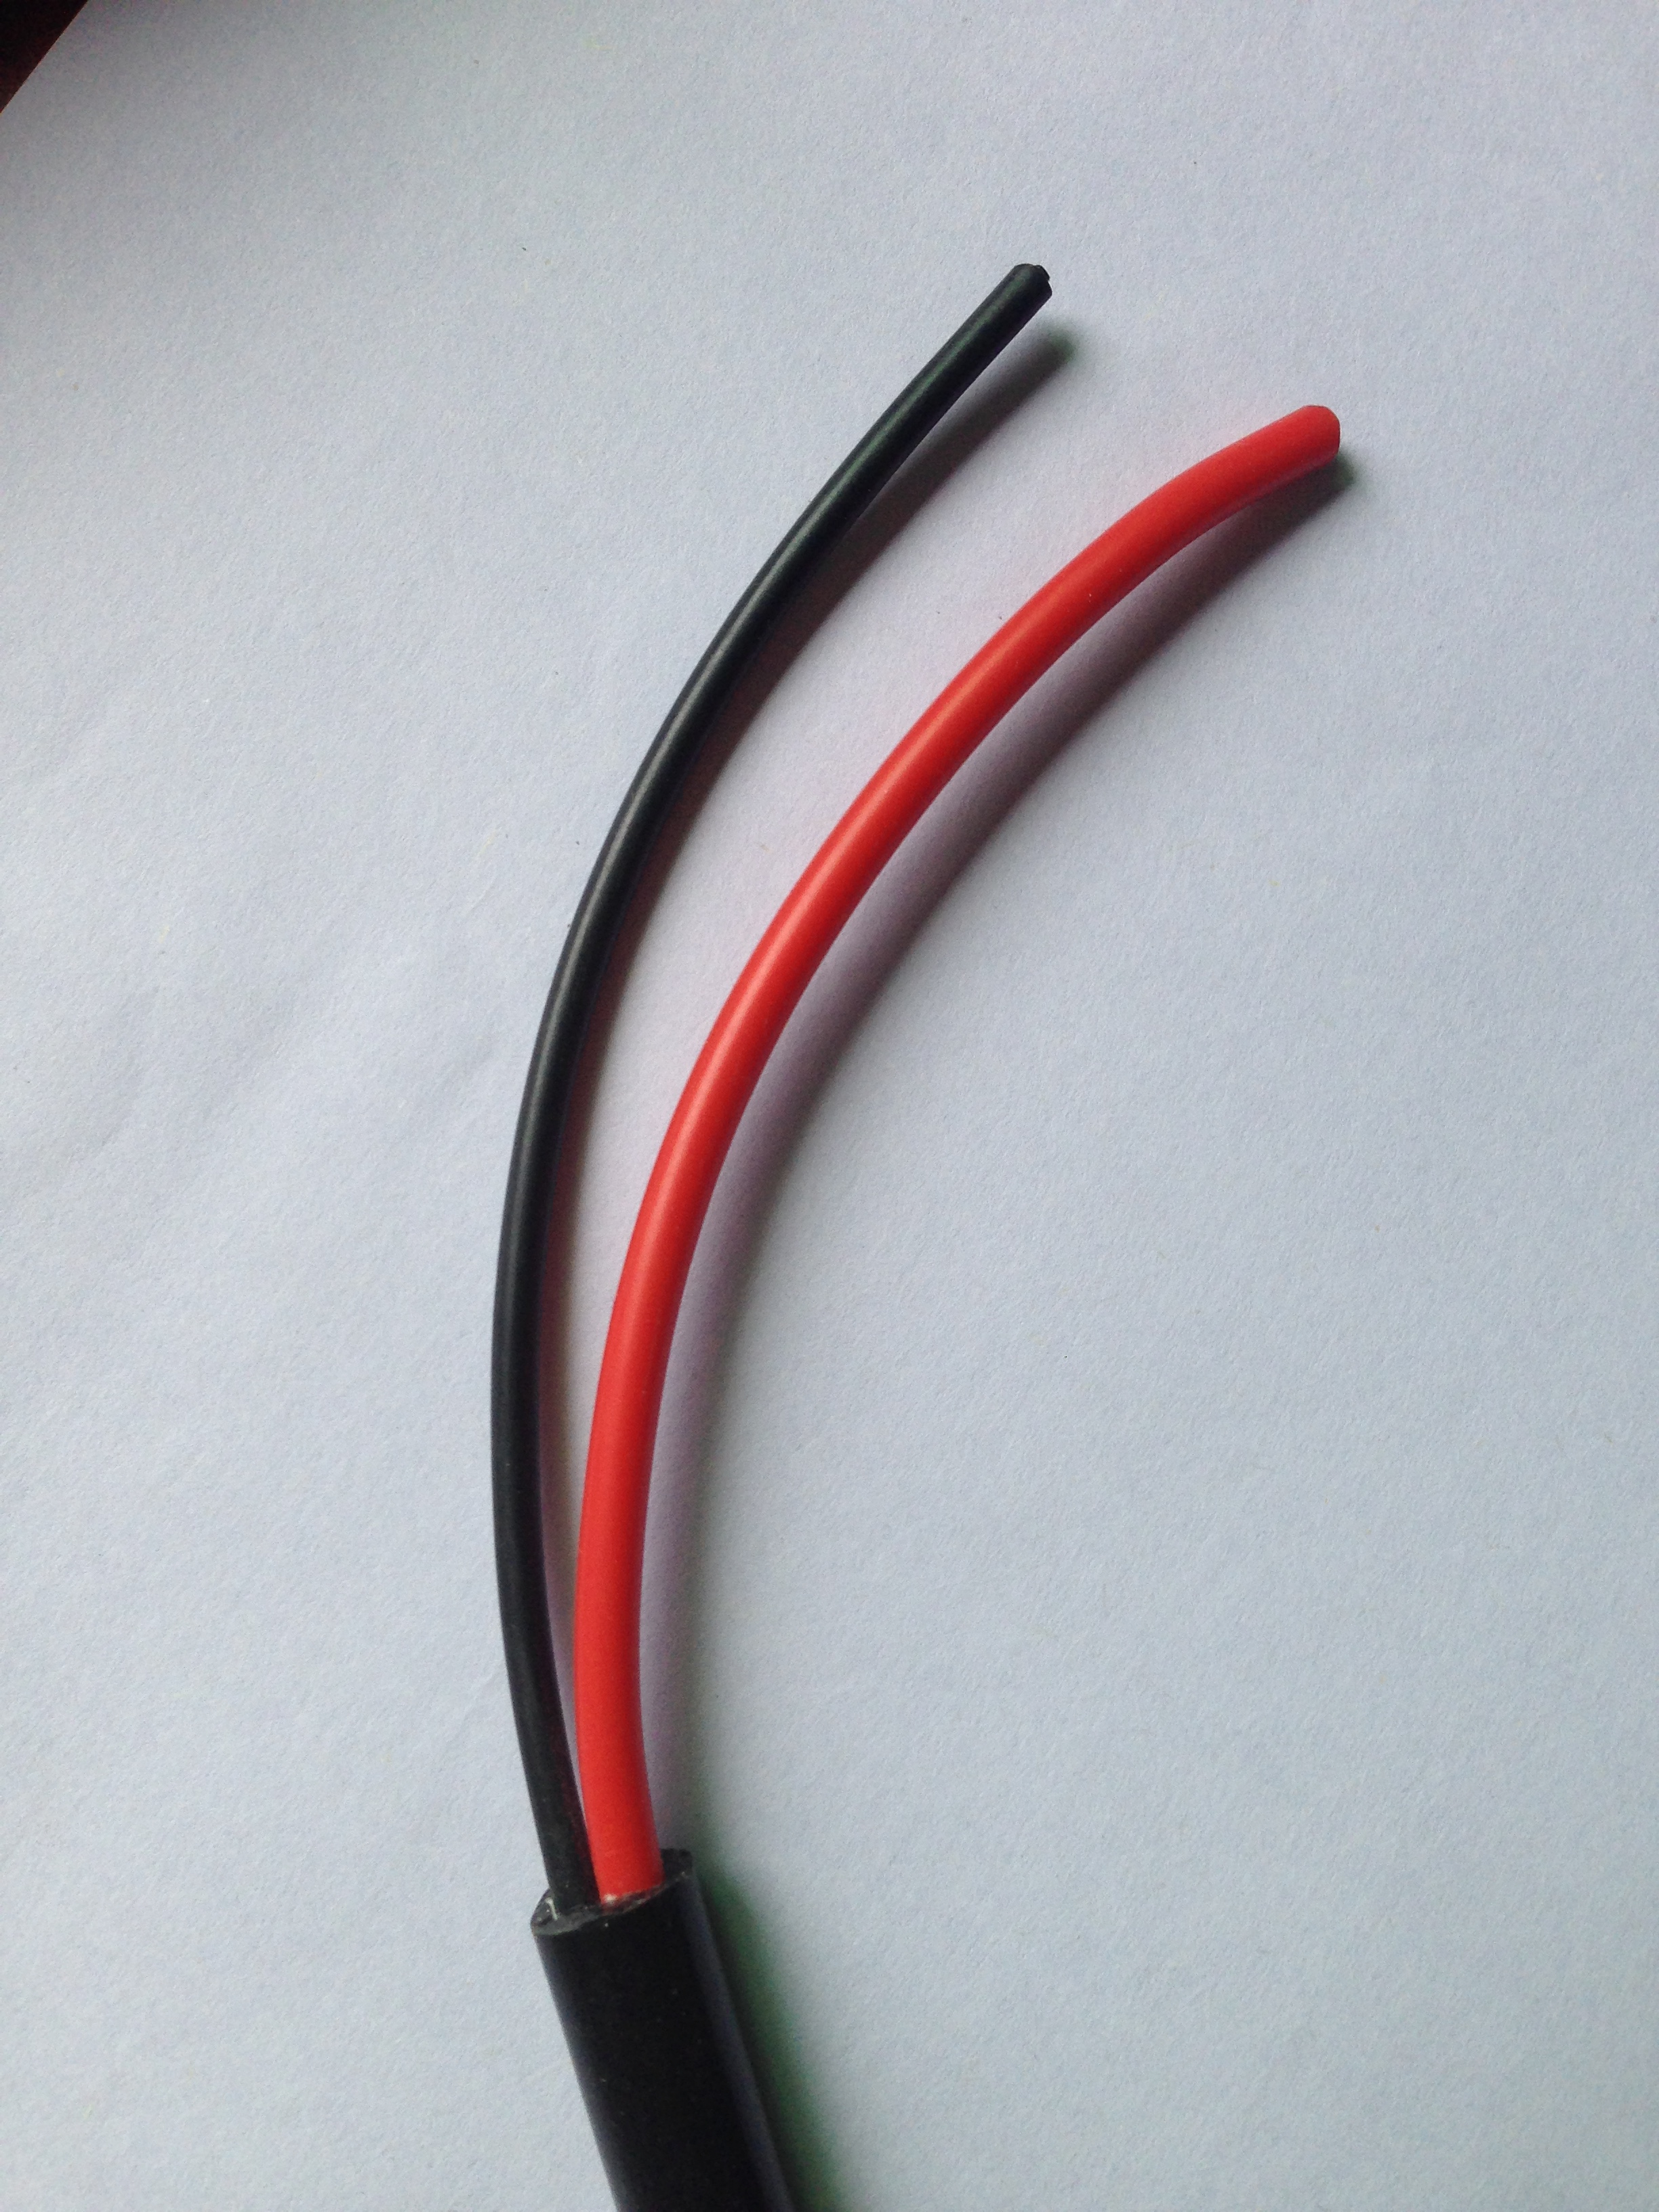 ARX-9 WIRE CABLE,ARX-9 WIRE,ARX-9 CABLE,Irrax R9 flat 22AWG WIRE  